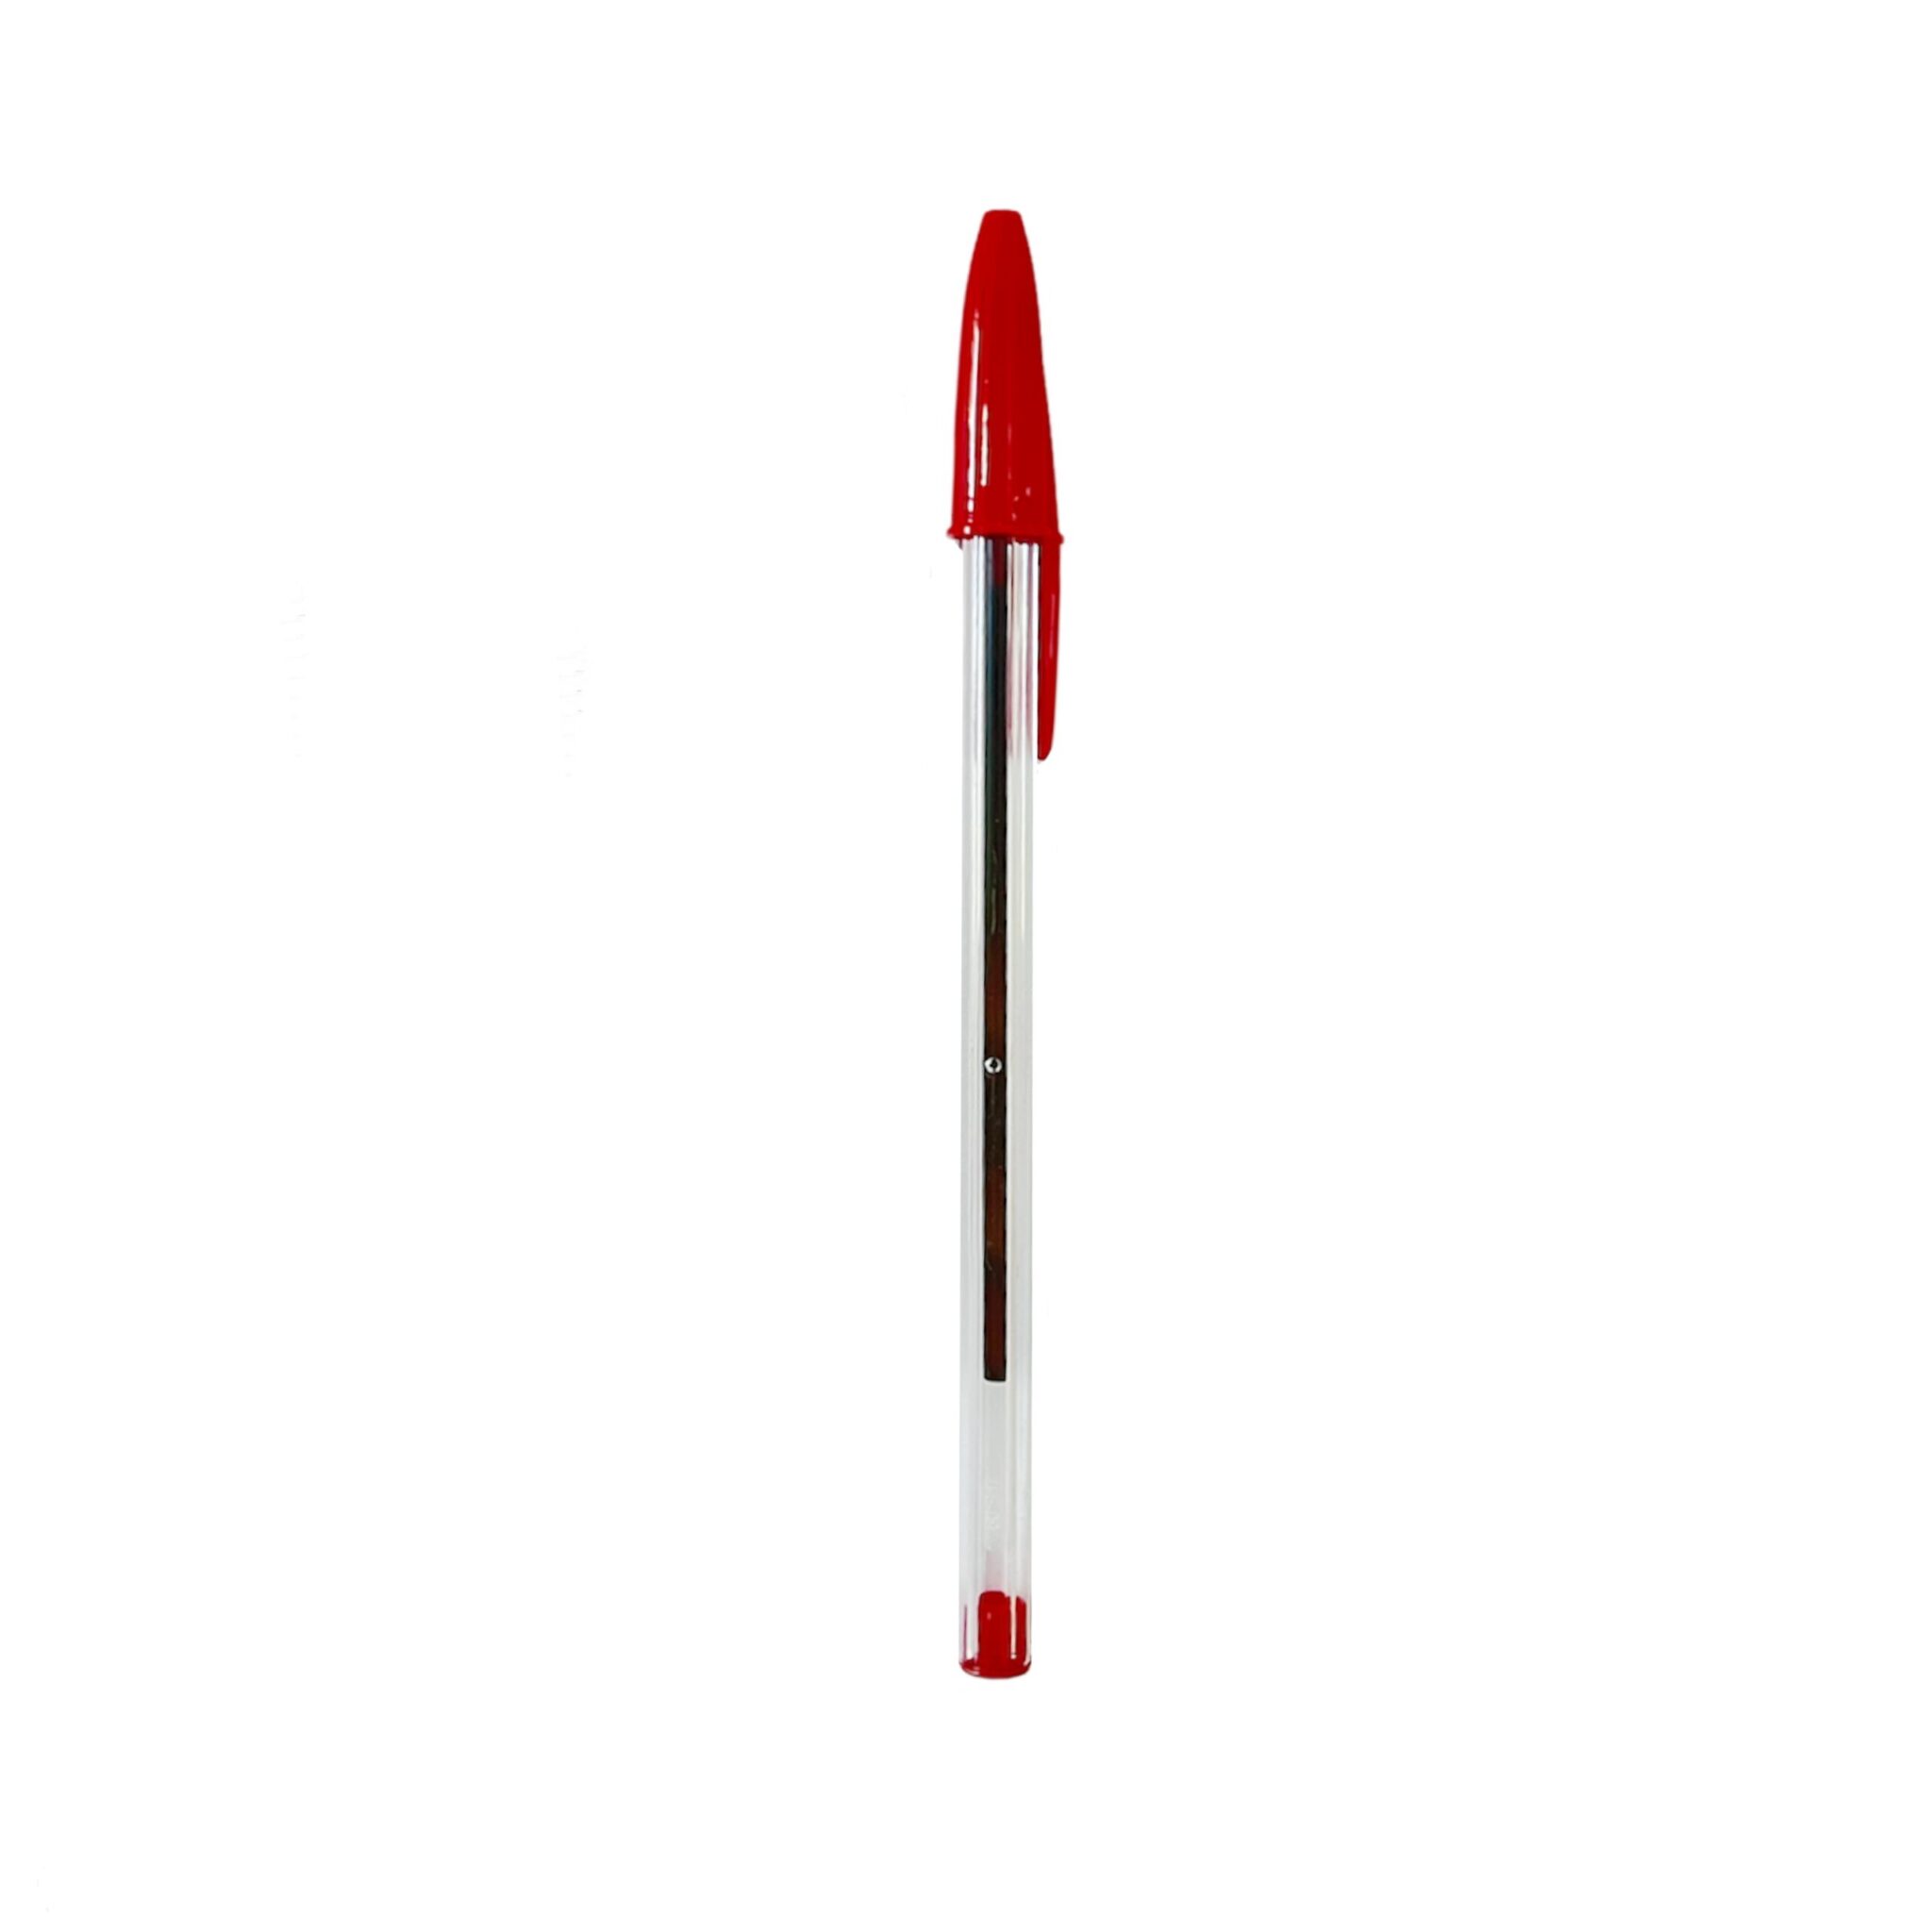 Stylo bille cristal rouge Marque BIC